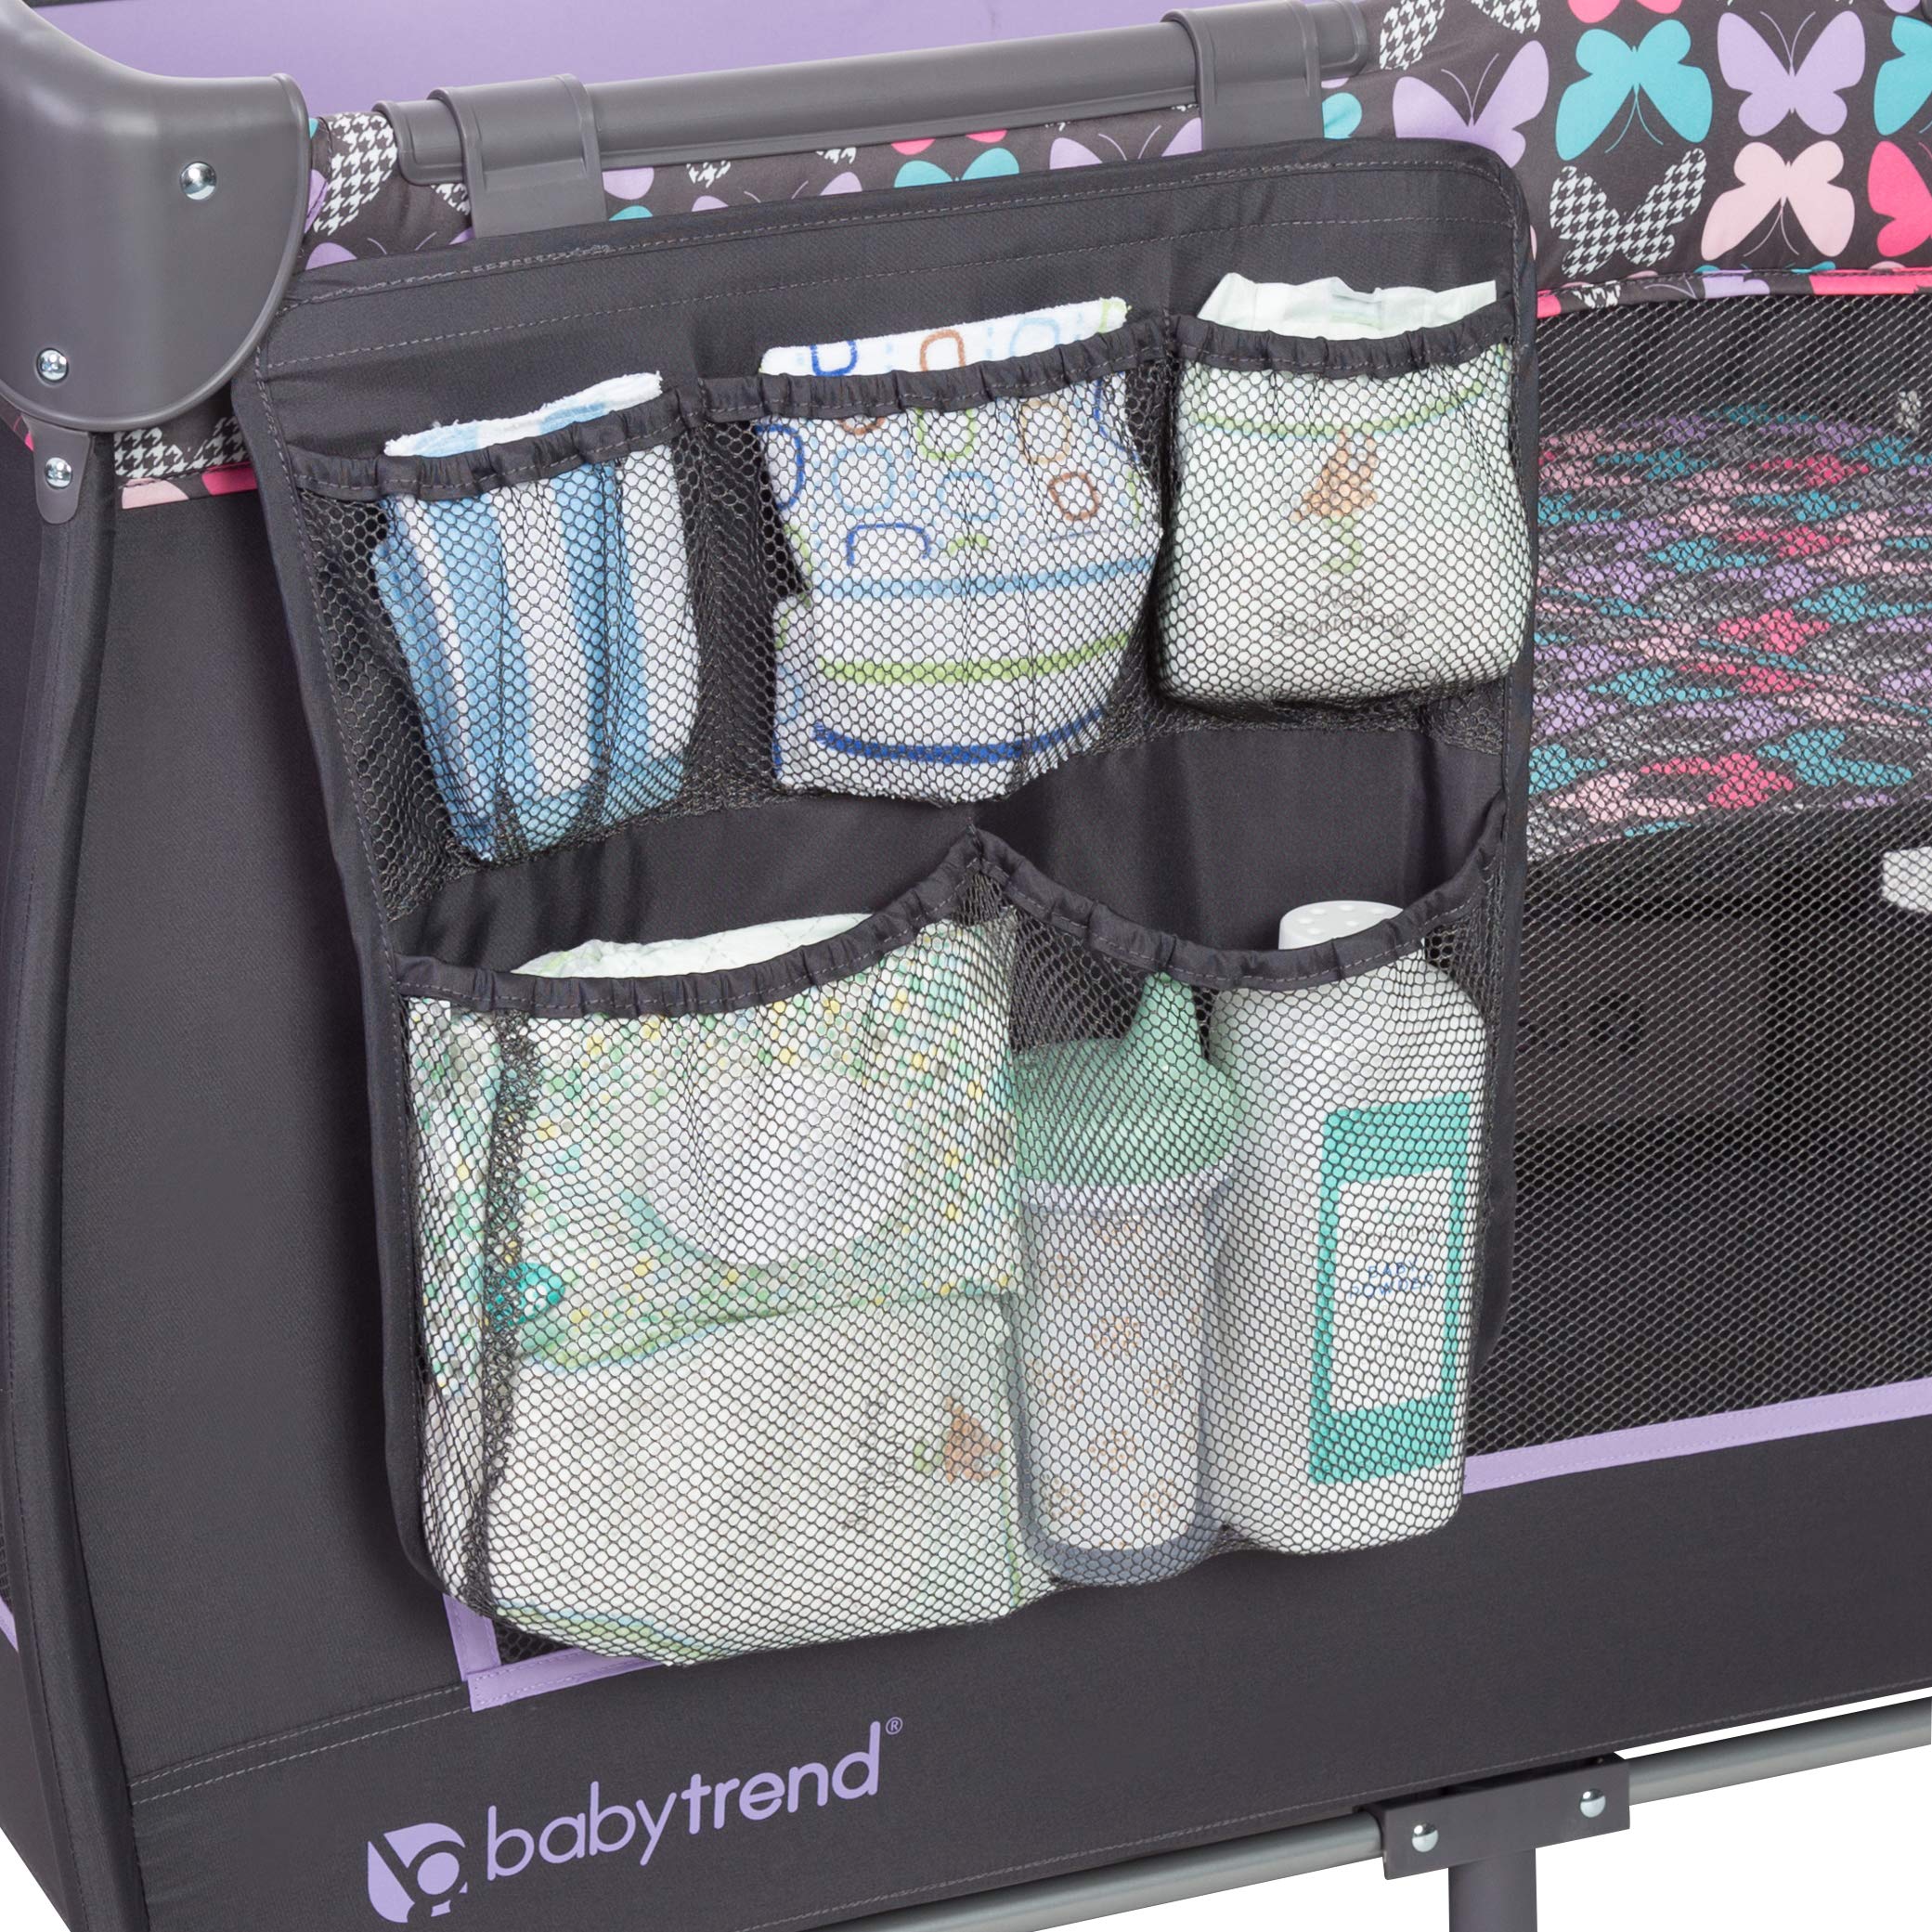 Baby Trend Portable Folding Infant Trend-E Nursery Center with Bassinet, Sophia - image 5 of 9